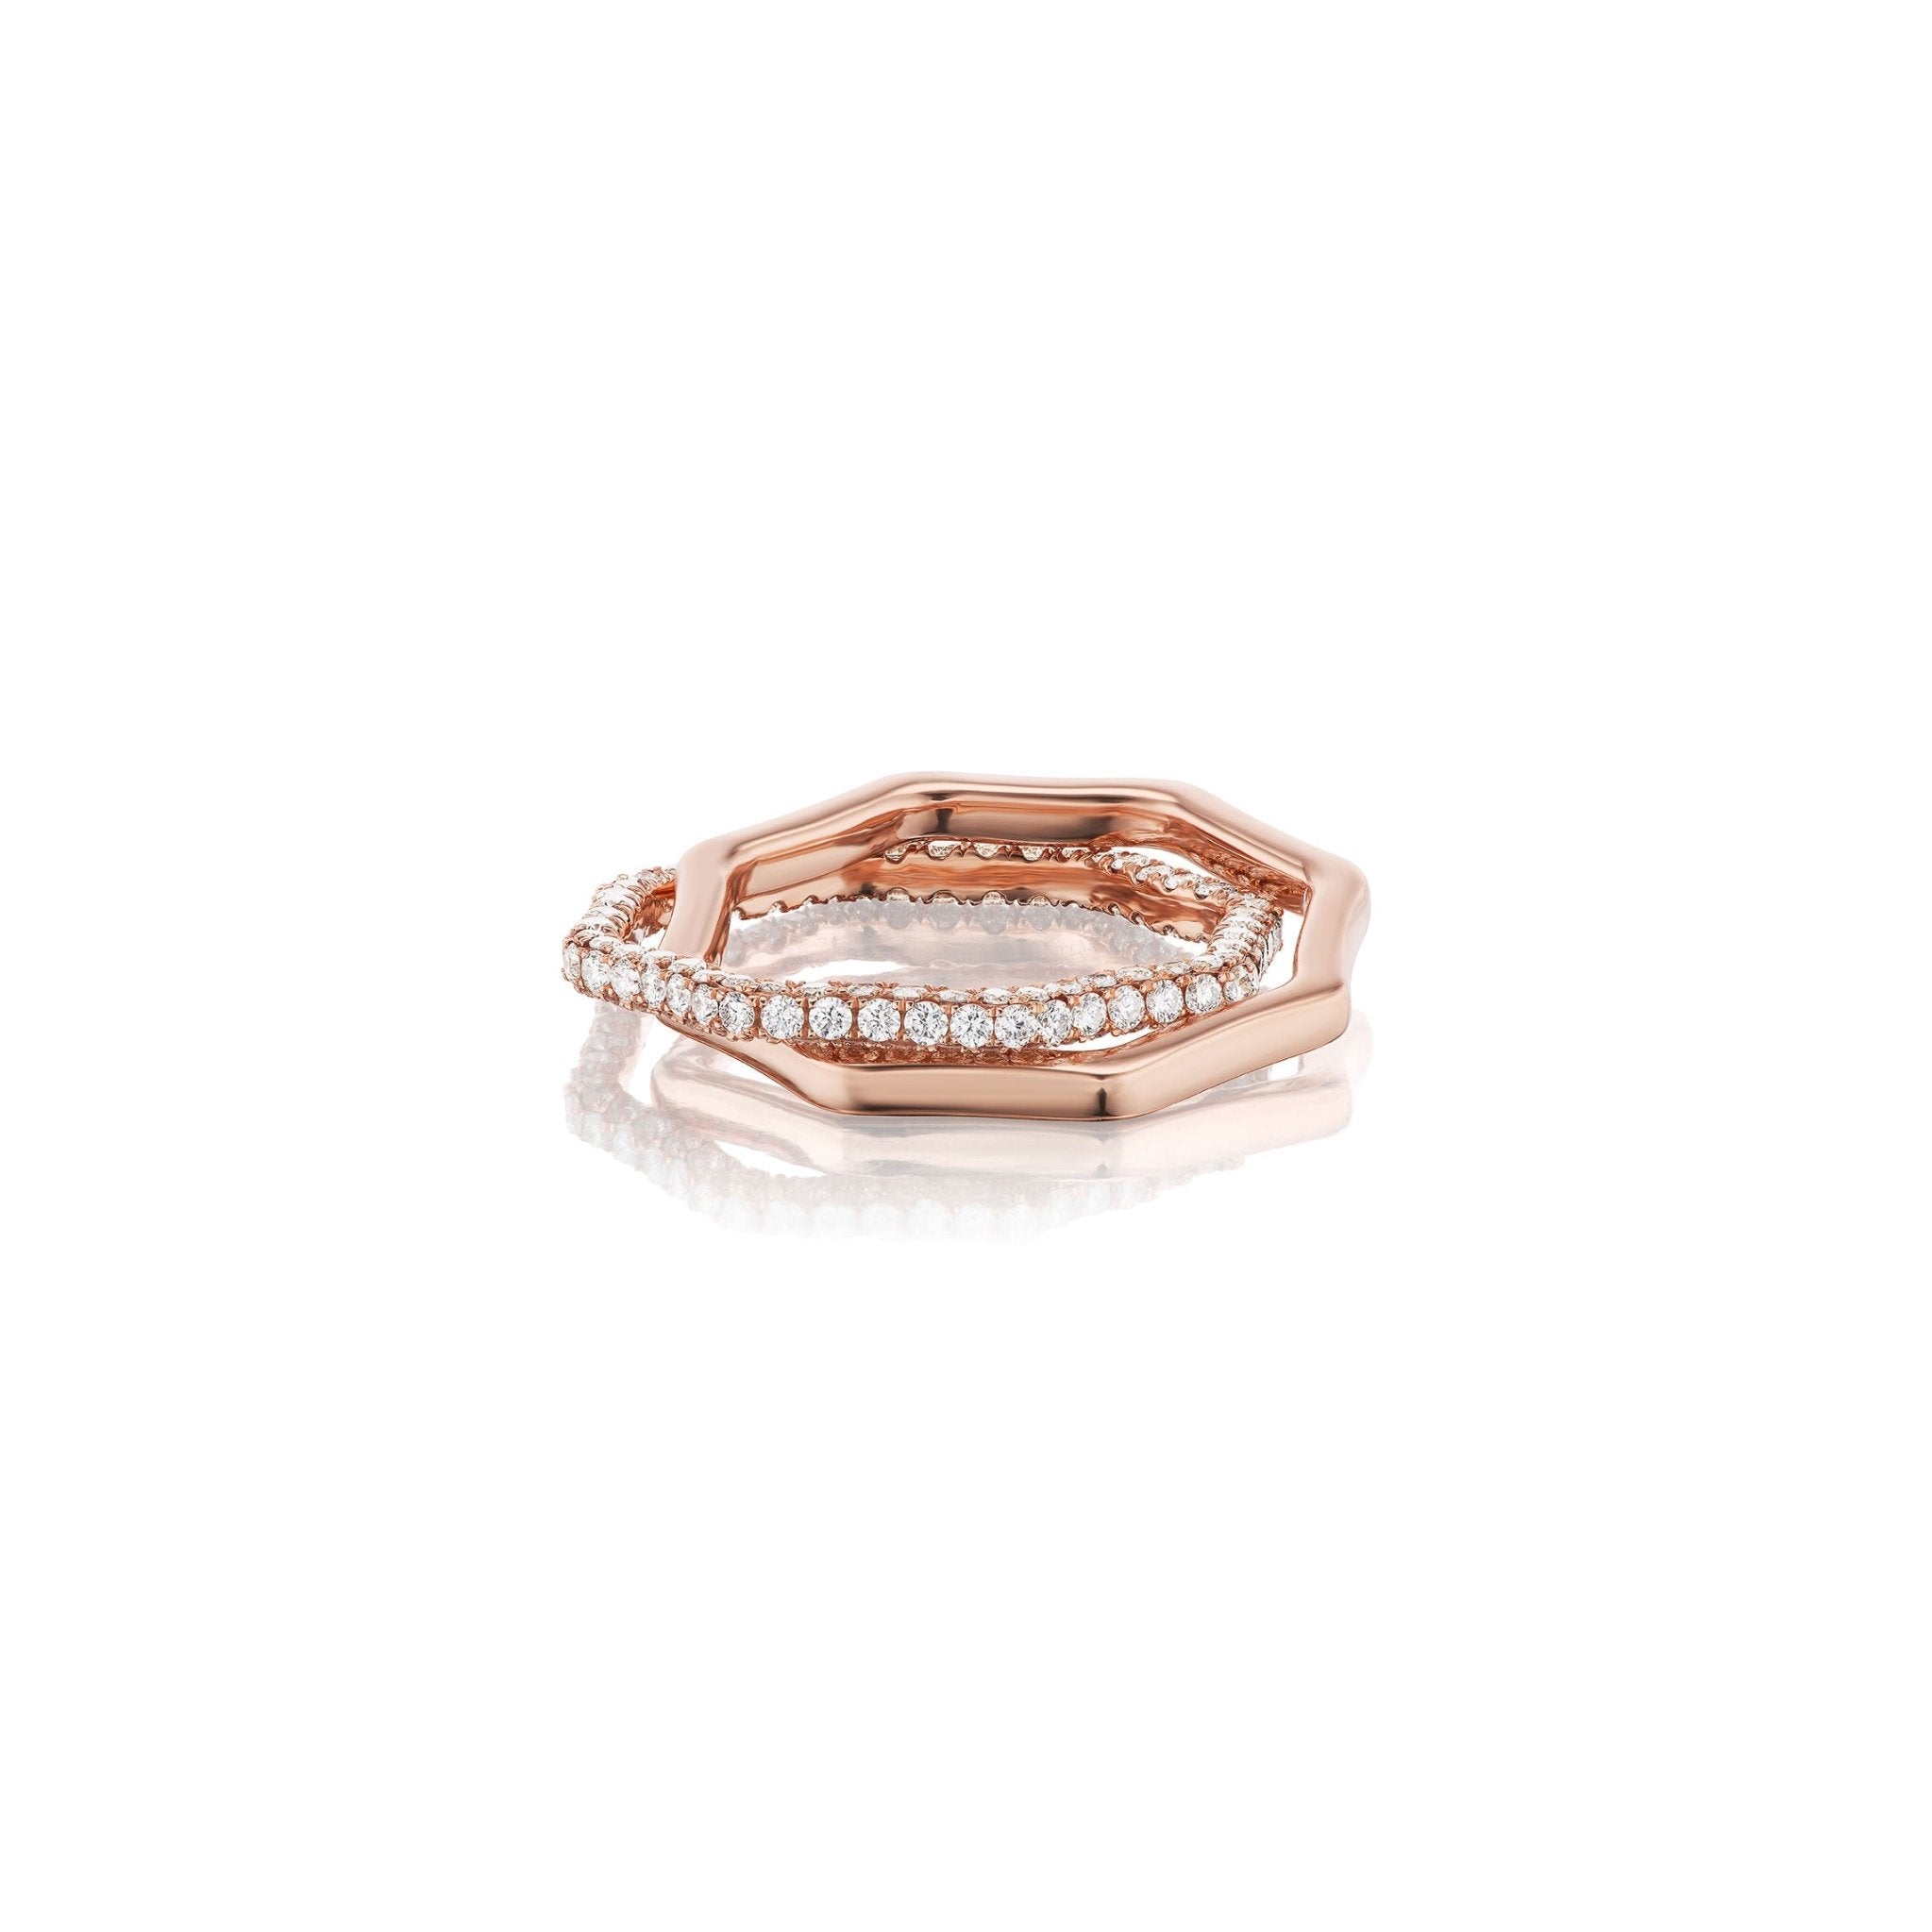 WAVE RING WITH TRIPLE ROW OF DIAMONDS - ANNE BAKERWAVE RING WITH TRIPLE ROW OF DIAMONDSANNE BAKER